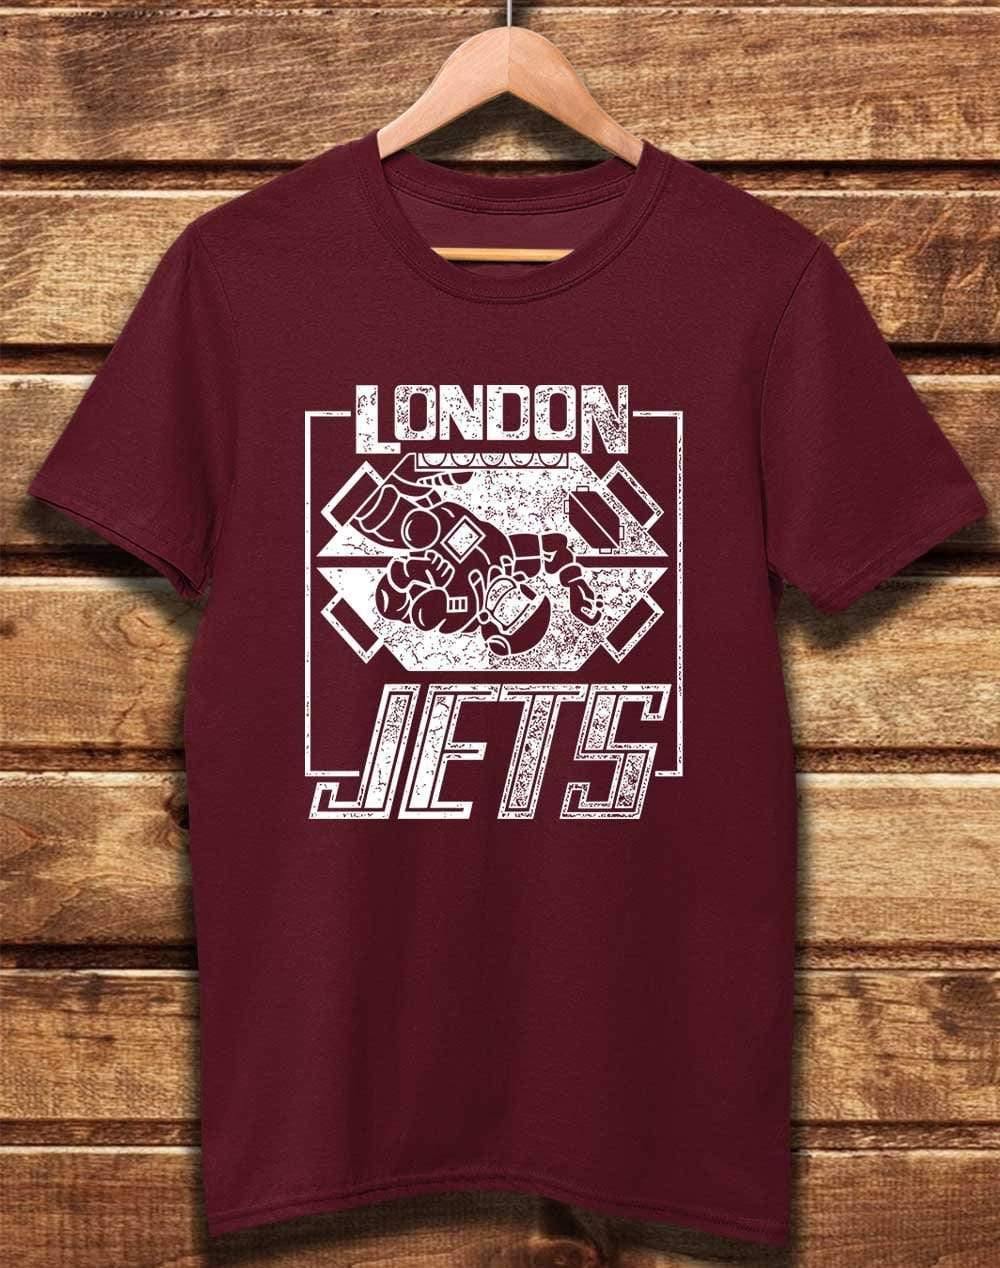 DELUXE London Jets Organic Cotton T-Shirt XS / Burgundy  - Off World Tees